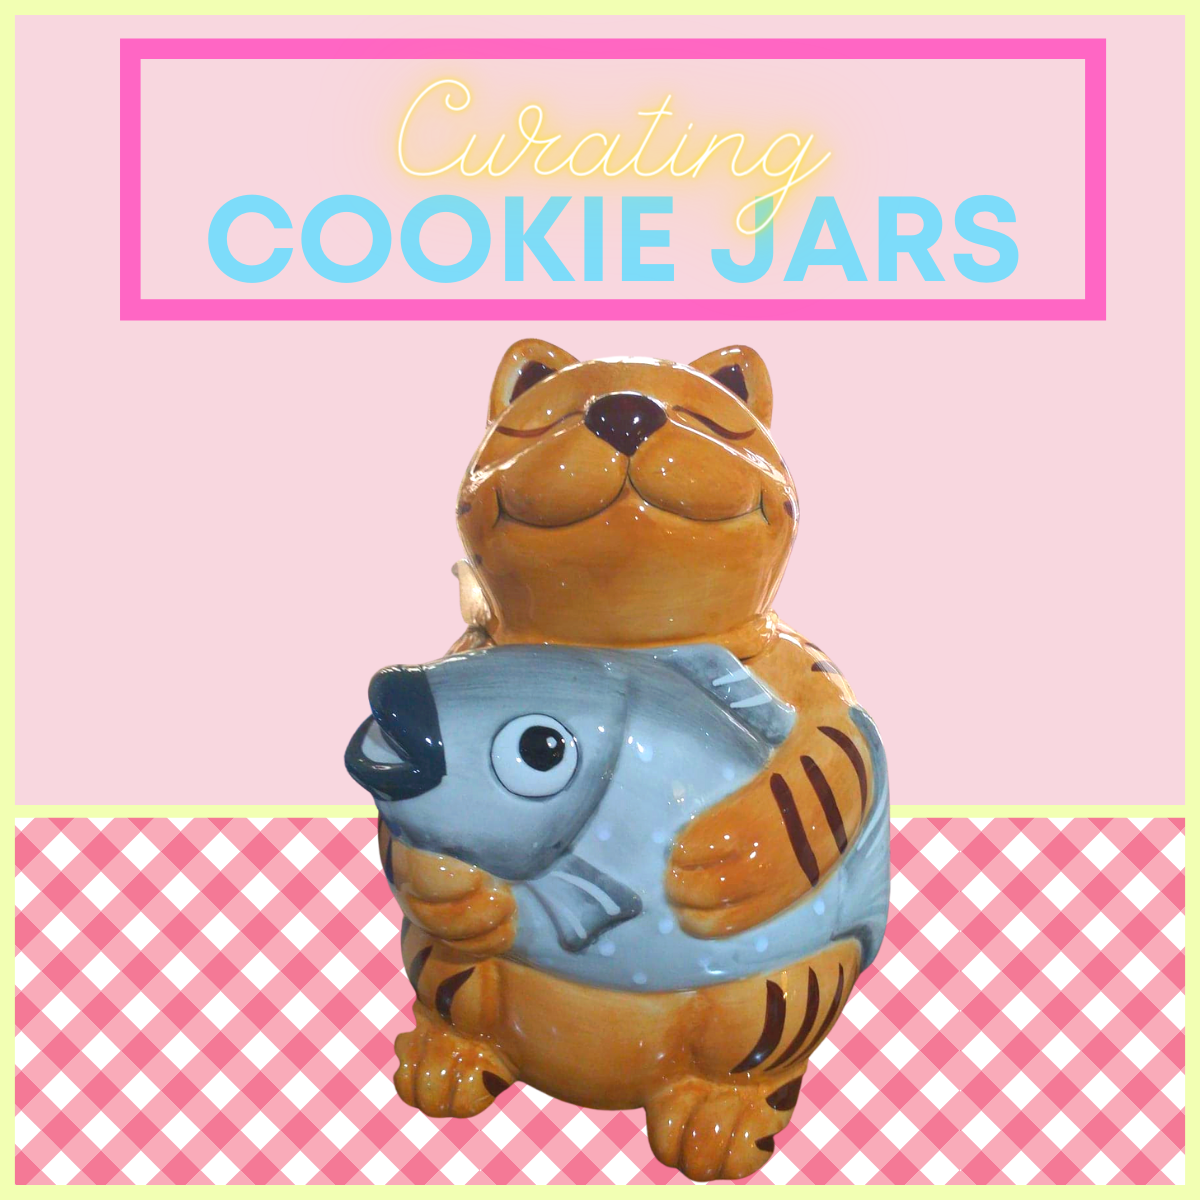 Tips for collecting cookie jars